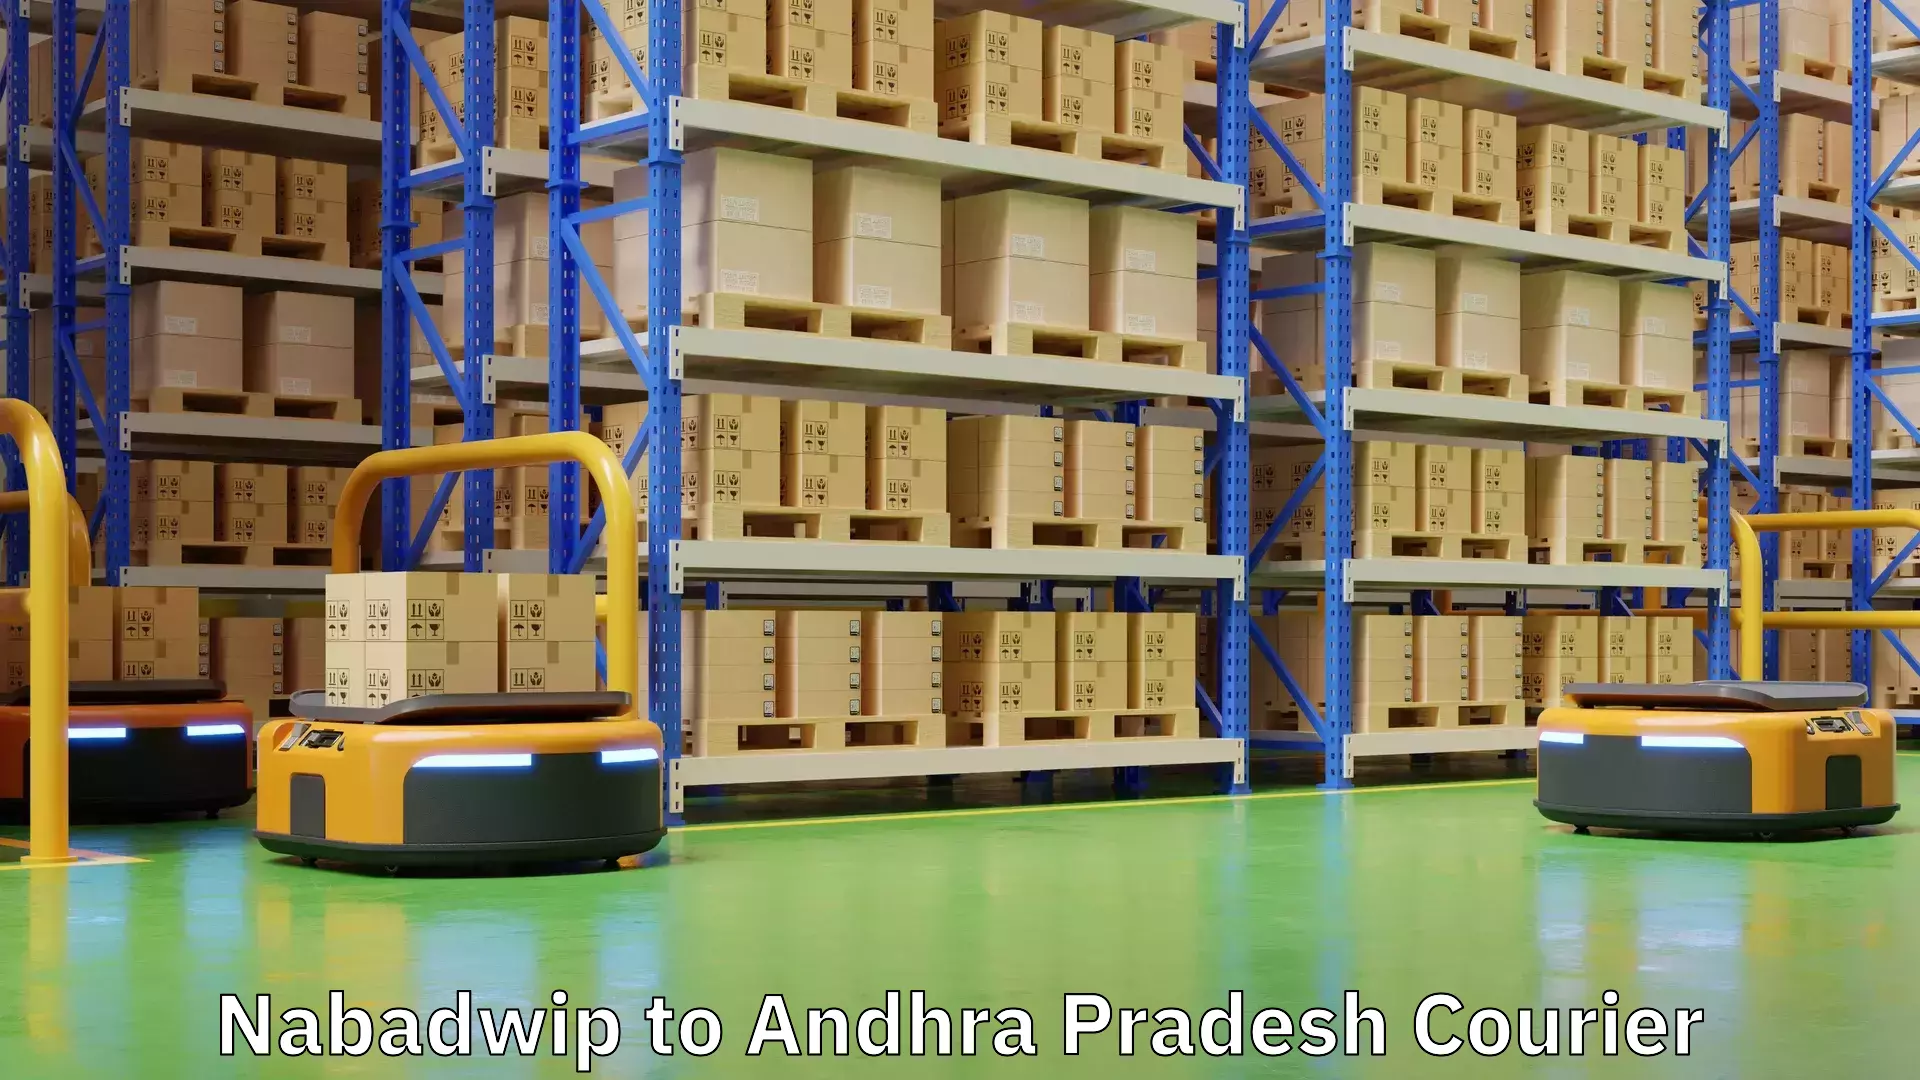 Fast shipping solutions Nabadwip to Visakhapatnam Port